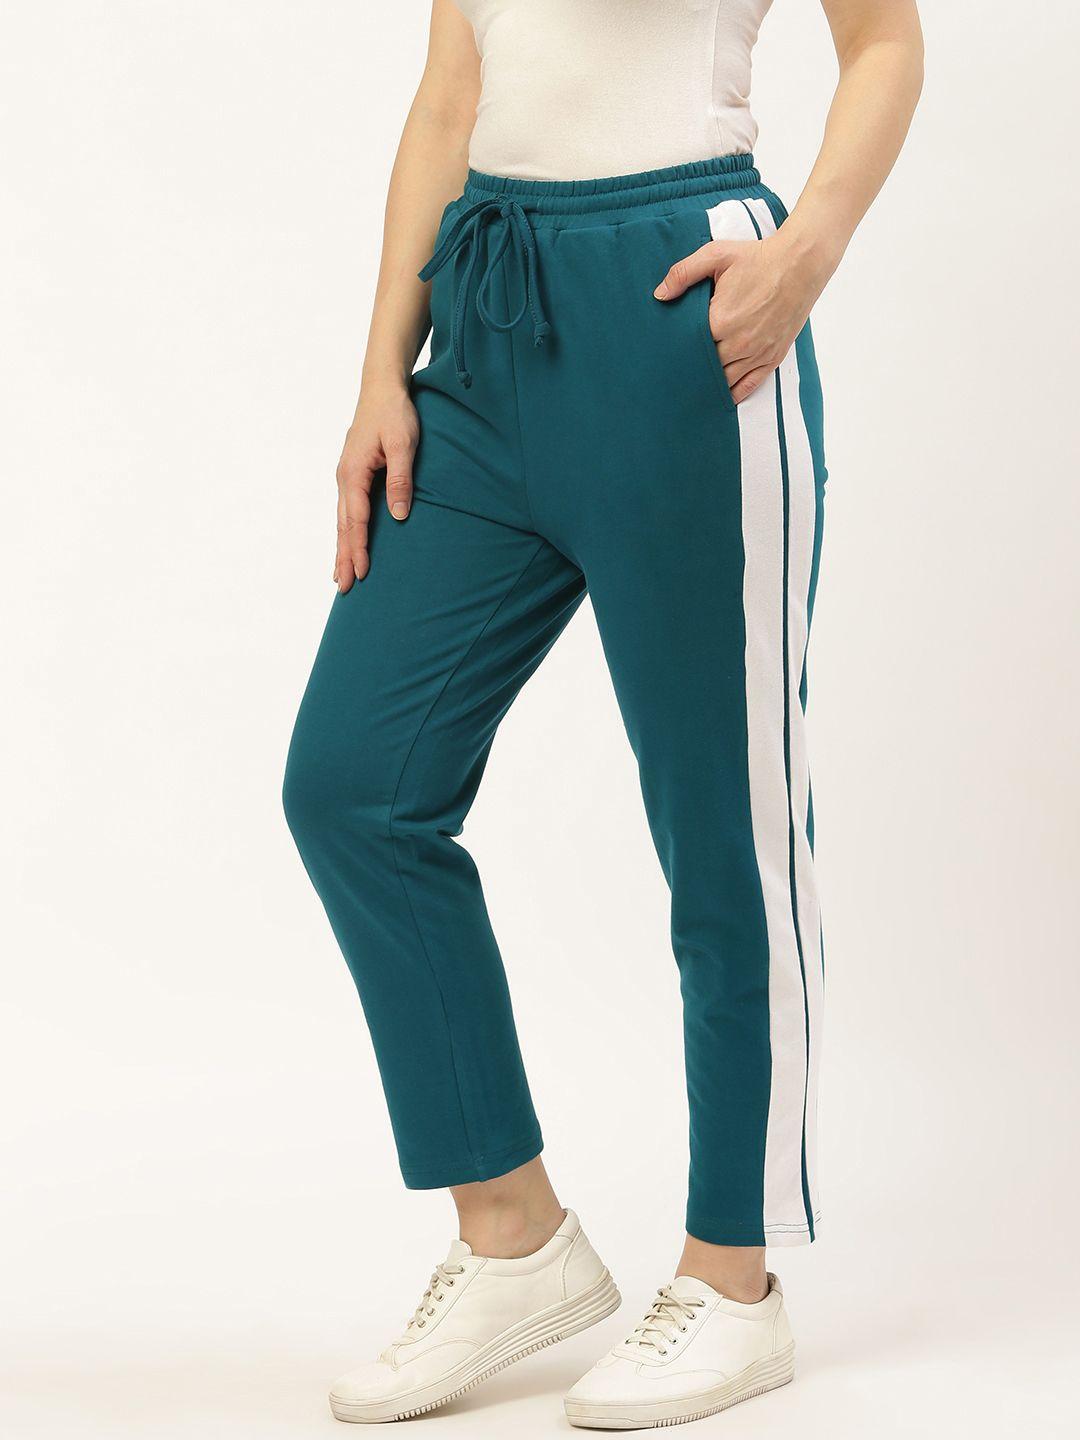 besiva women teal green solid track pants